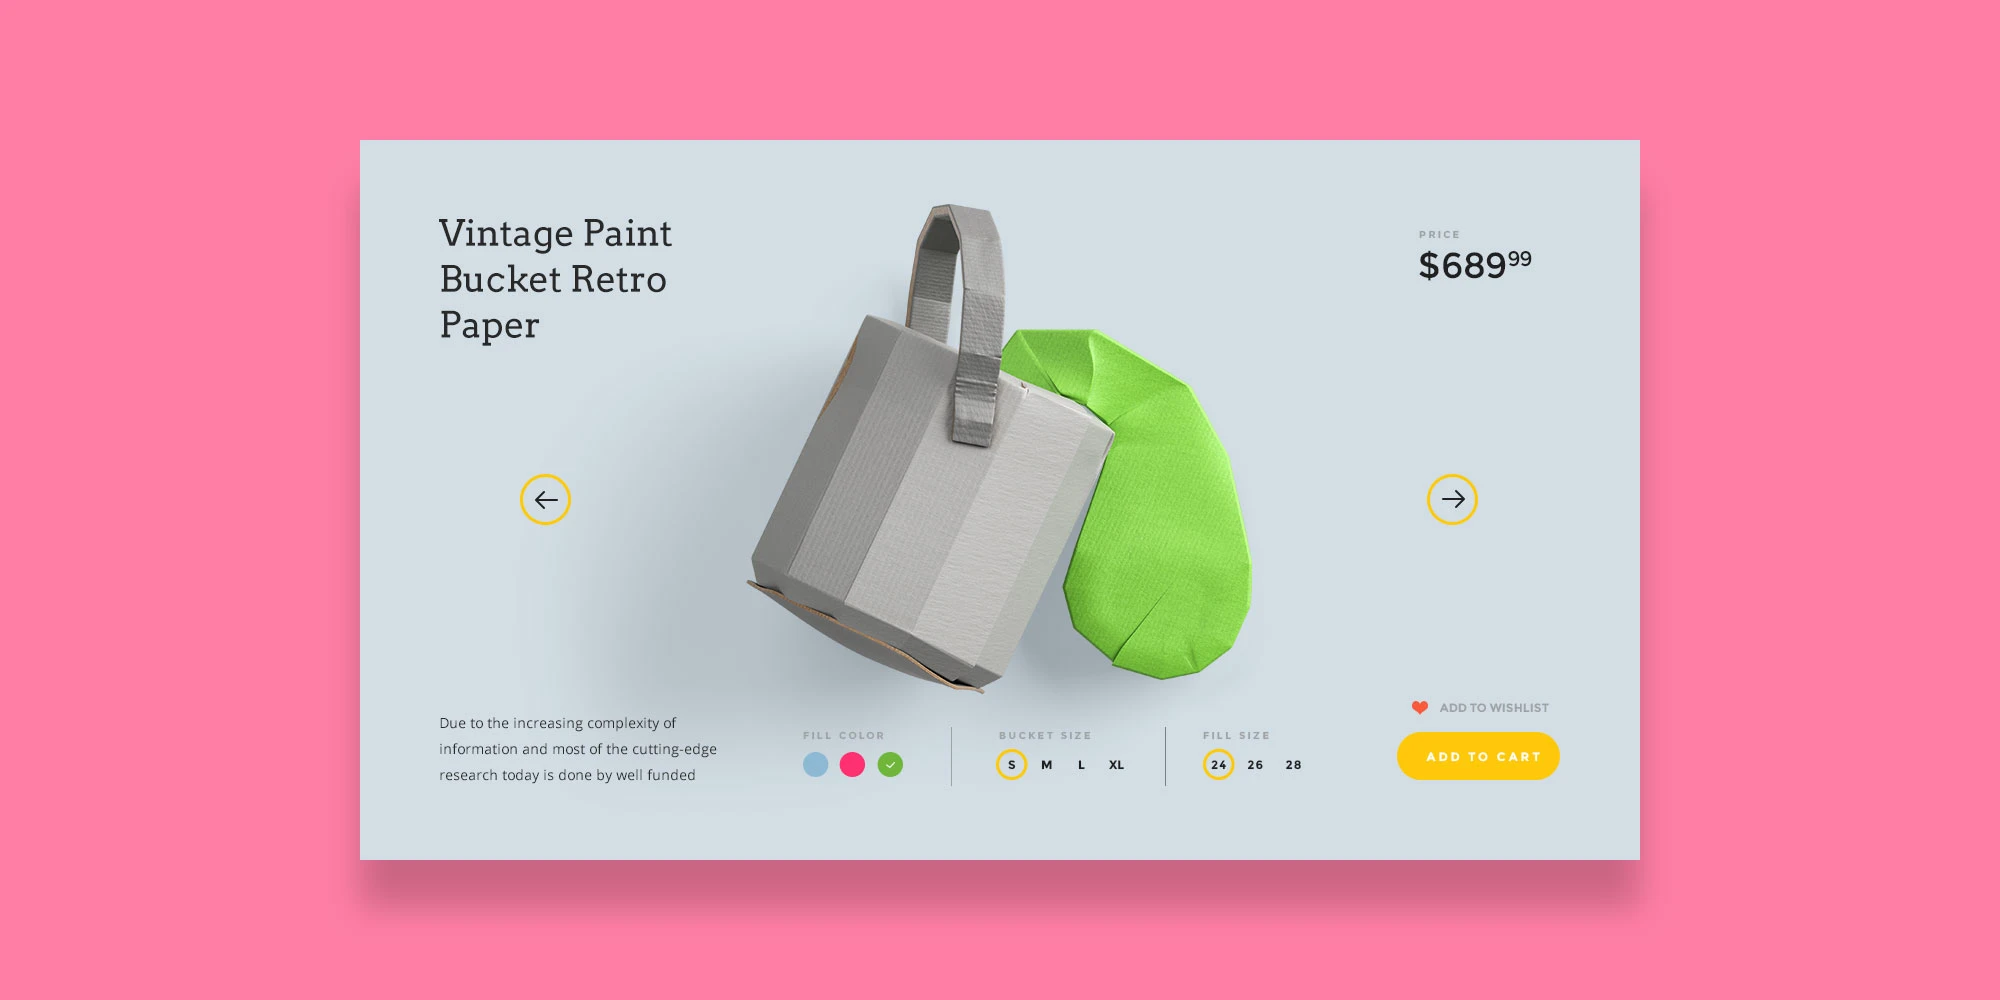 Free UI Kit Landing Page - Free UI Kit Landing Page is a huge design tool of handcrafted UI components. More than 80 layouts in popular categories, style guide, icons and elements.